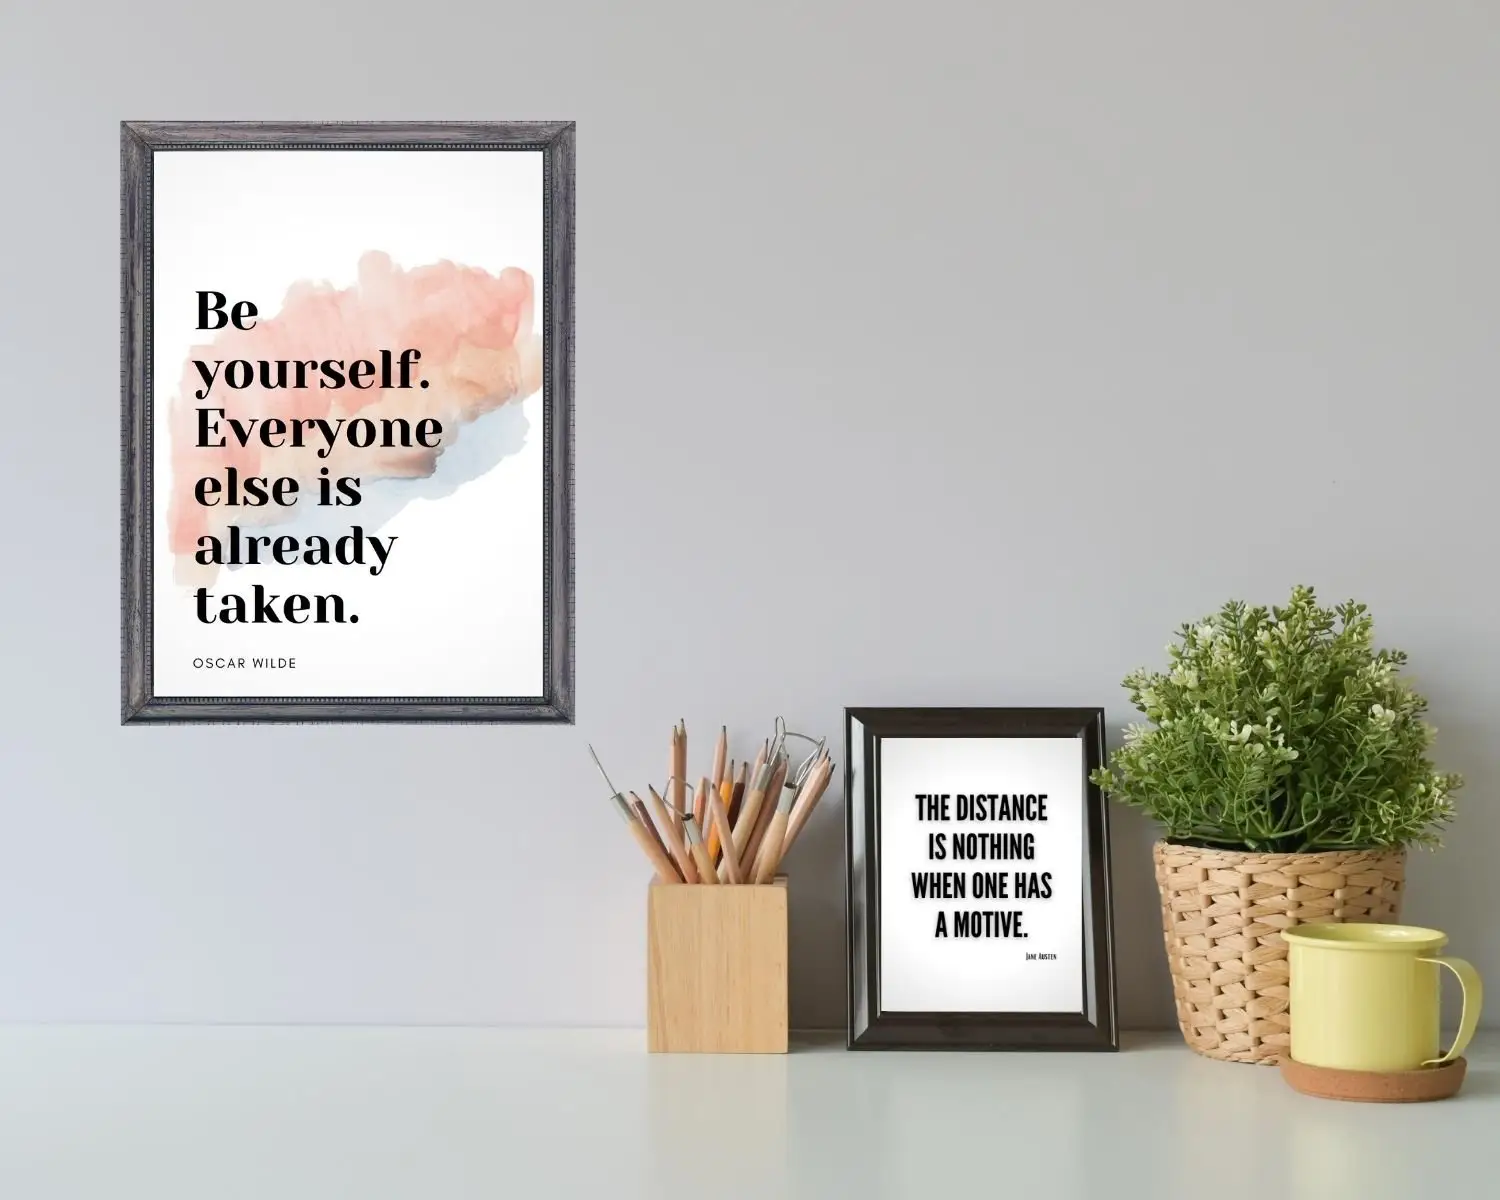 Inspirational Quote Art decorates a desk with a plant and mug